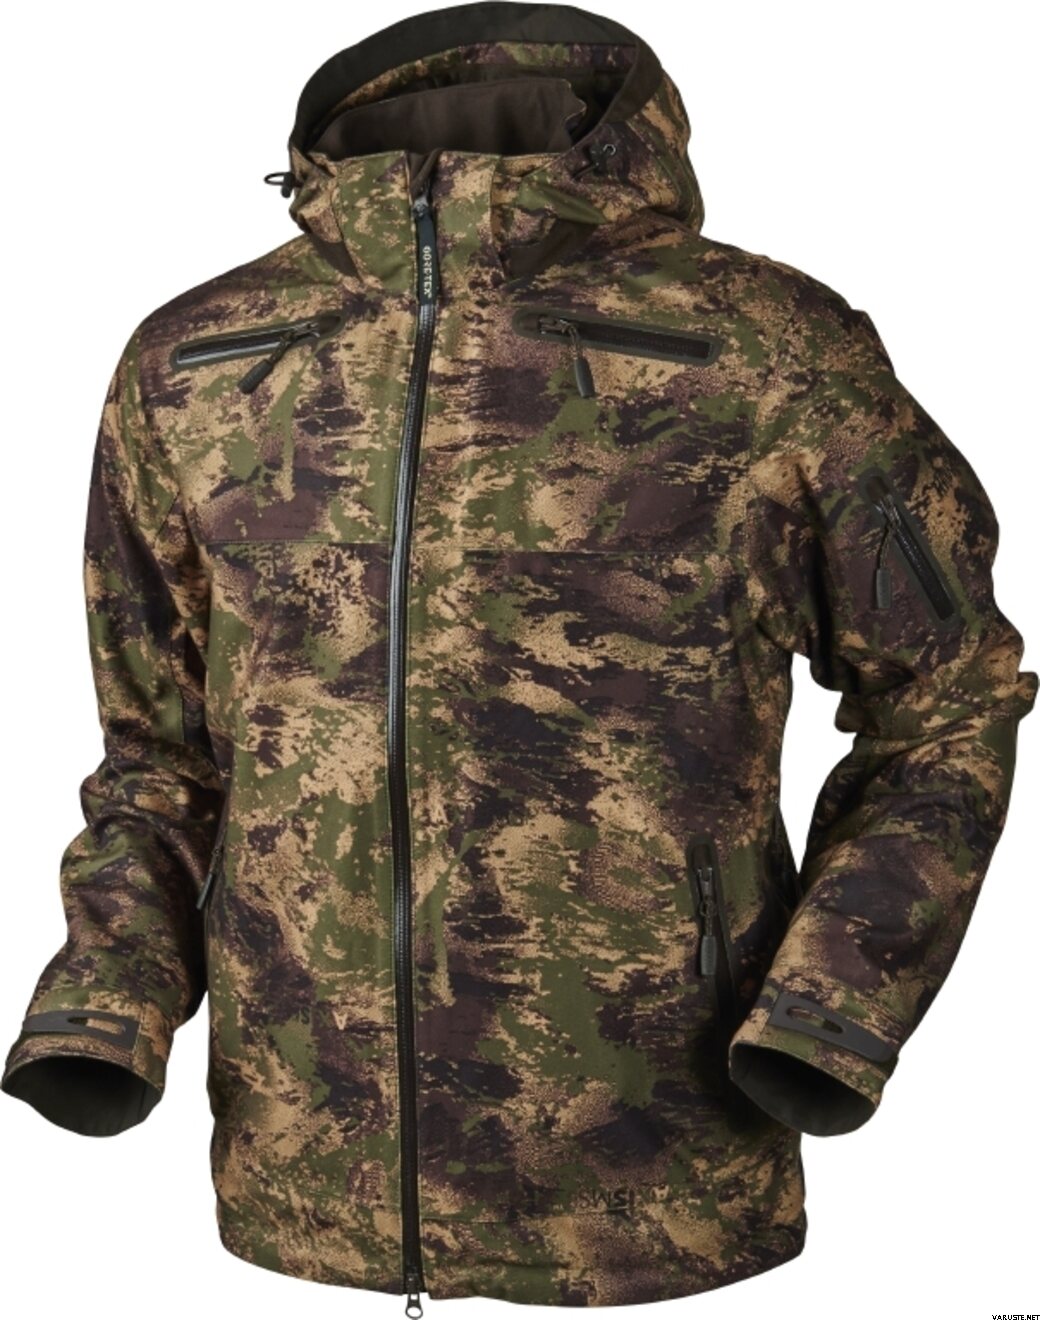 Härkila Stealth Jacket & Trousers | Men's Hunting Clothing Sets ...